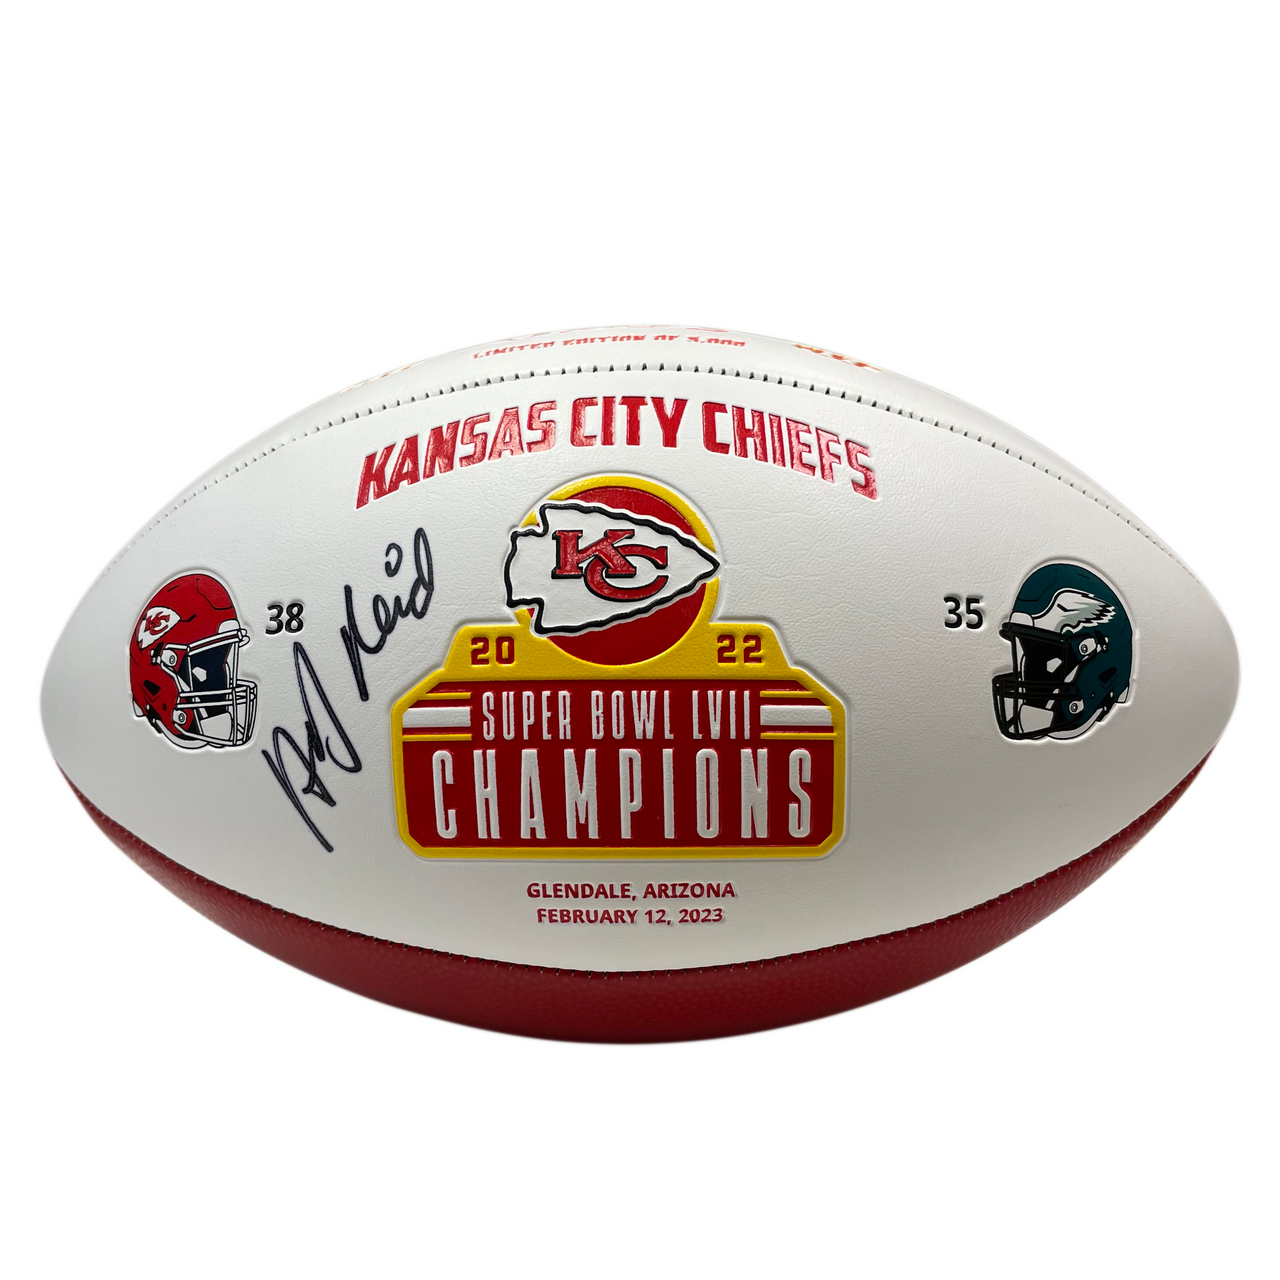 Kansas City Chiefs Super Bowl LVII Football Limited Edition Exclusive